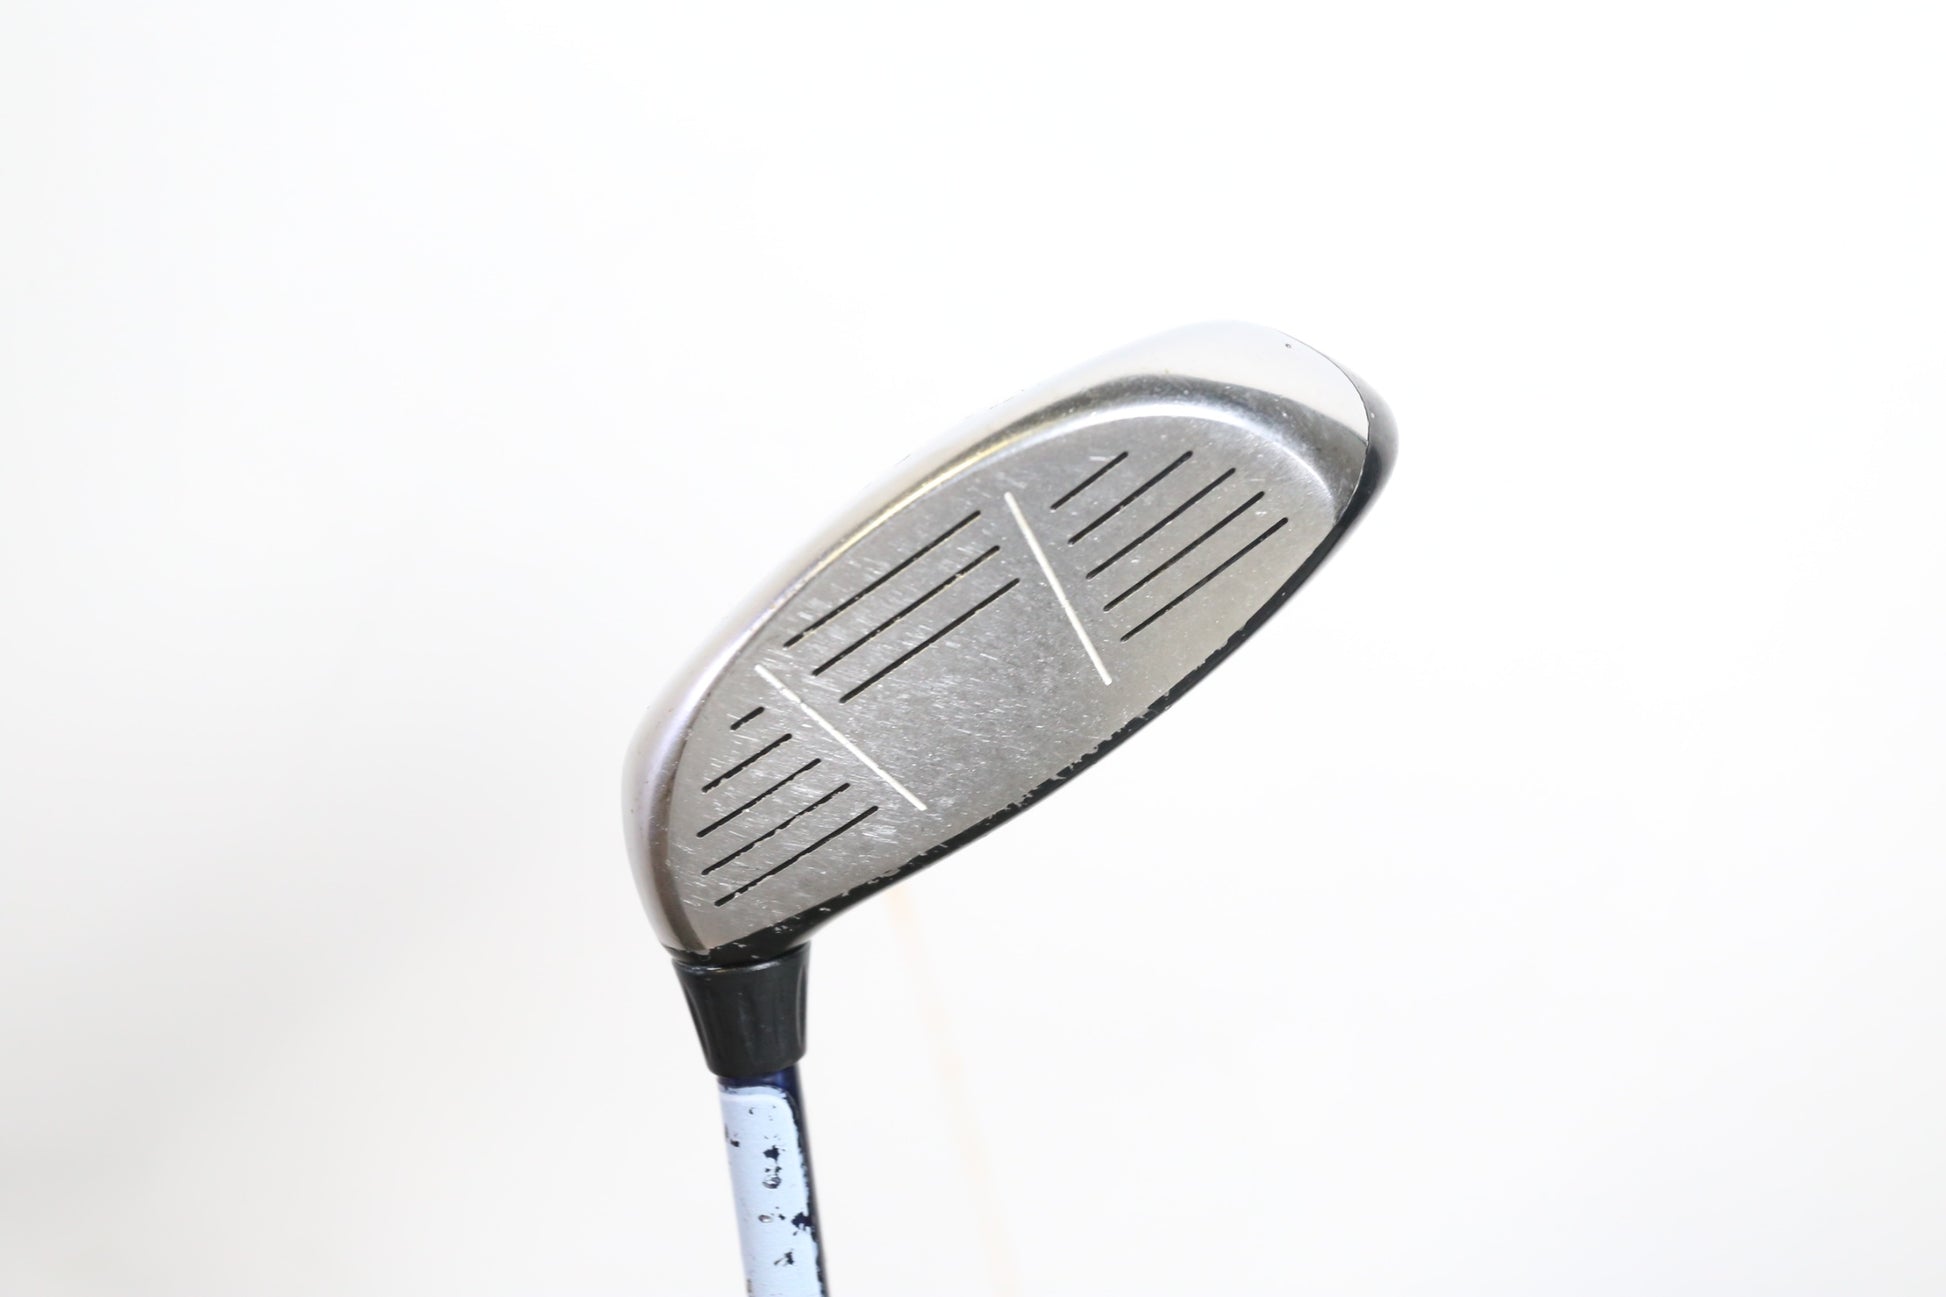 Used Callaway X 7-Wood - Right-Handed - 21 Degrees - Ladies Flex-Next Round